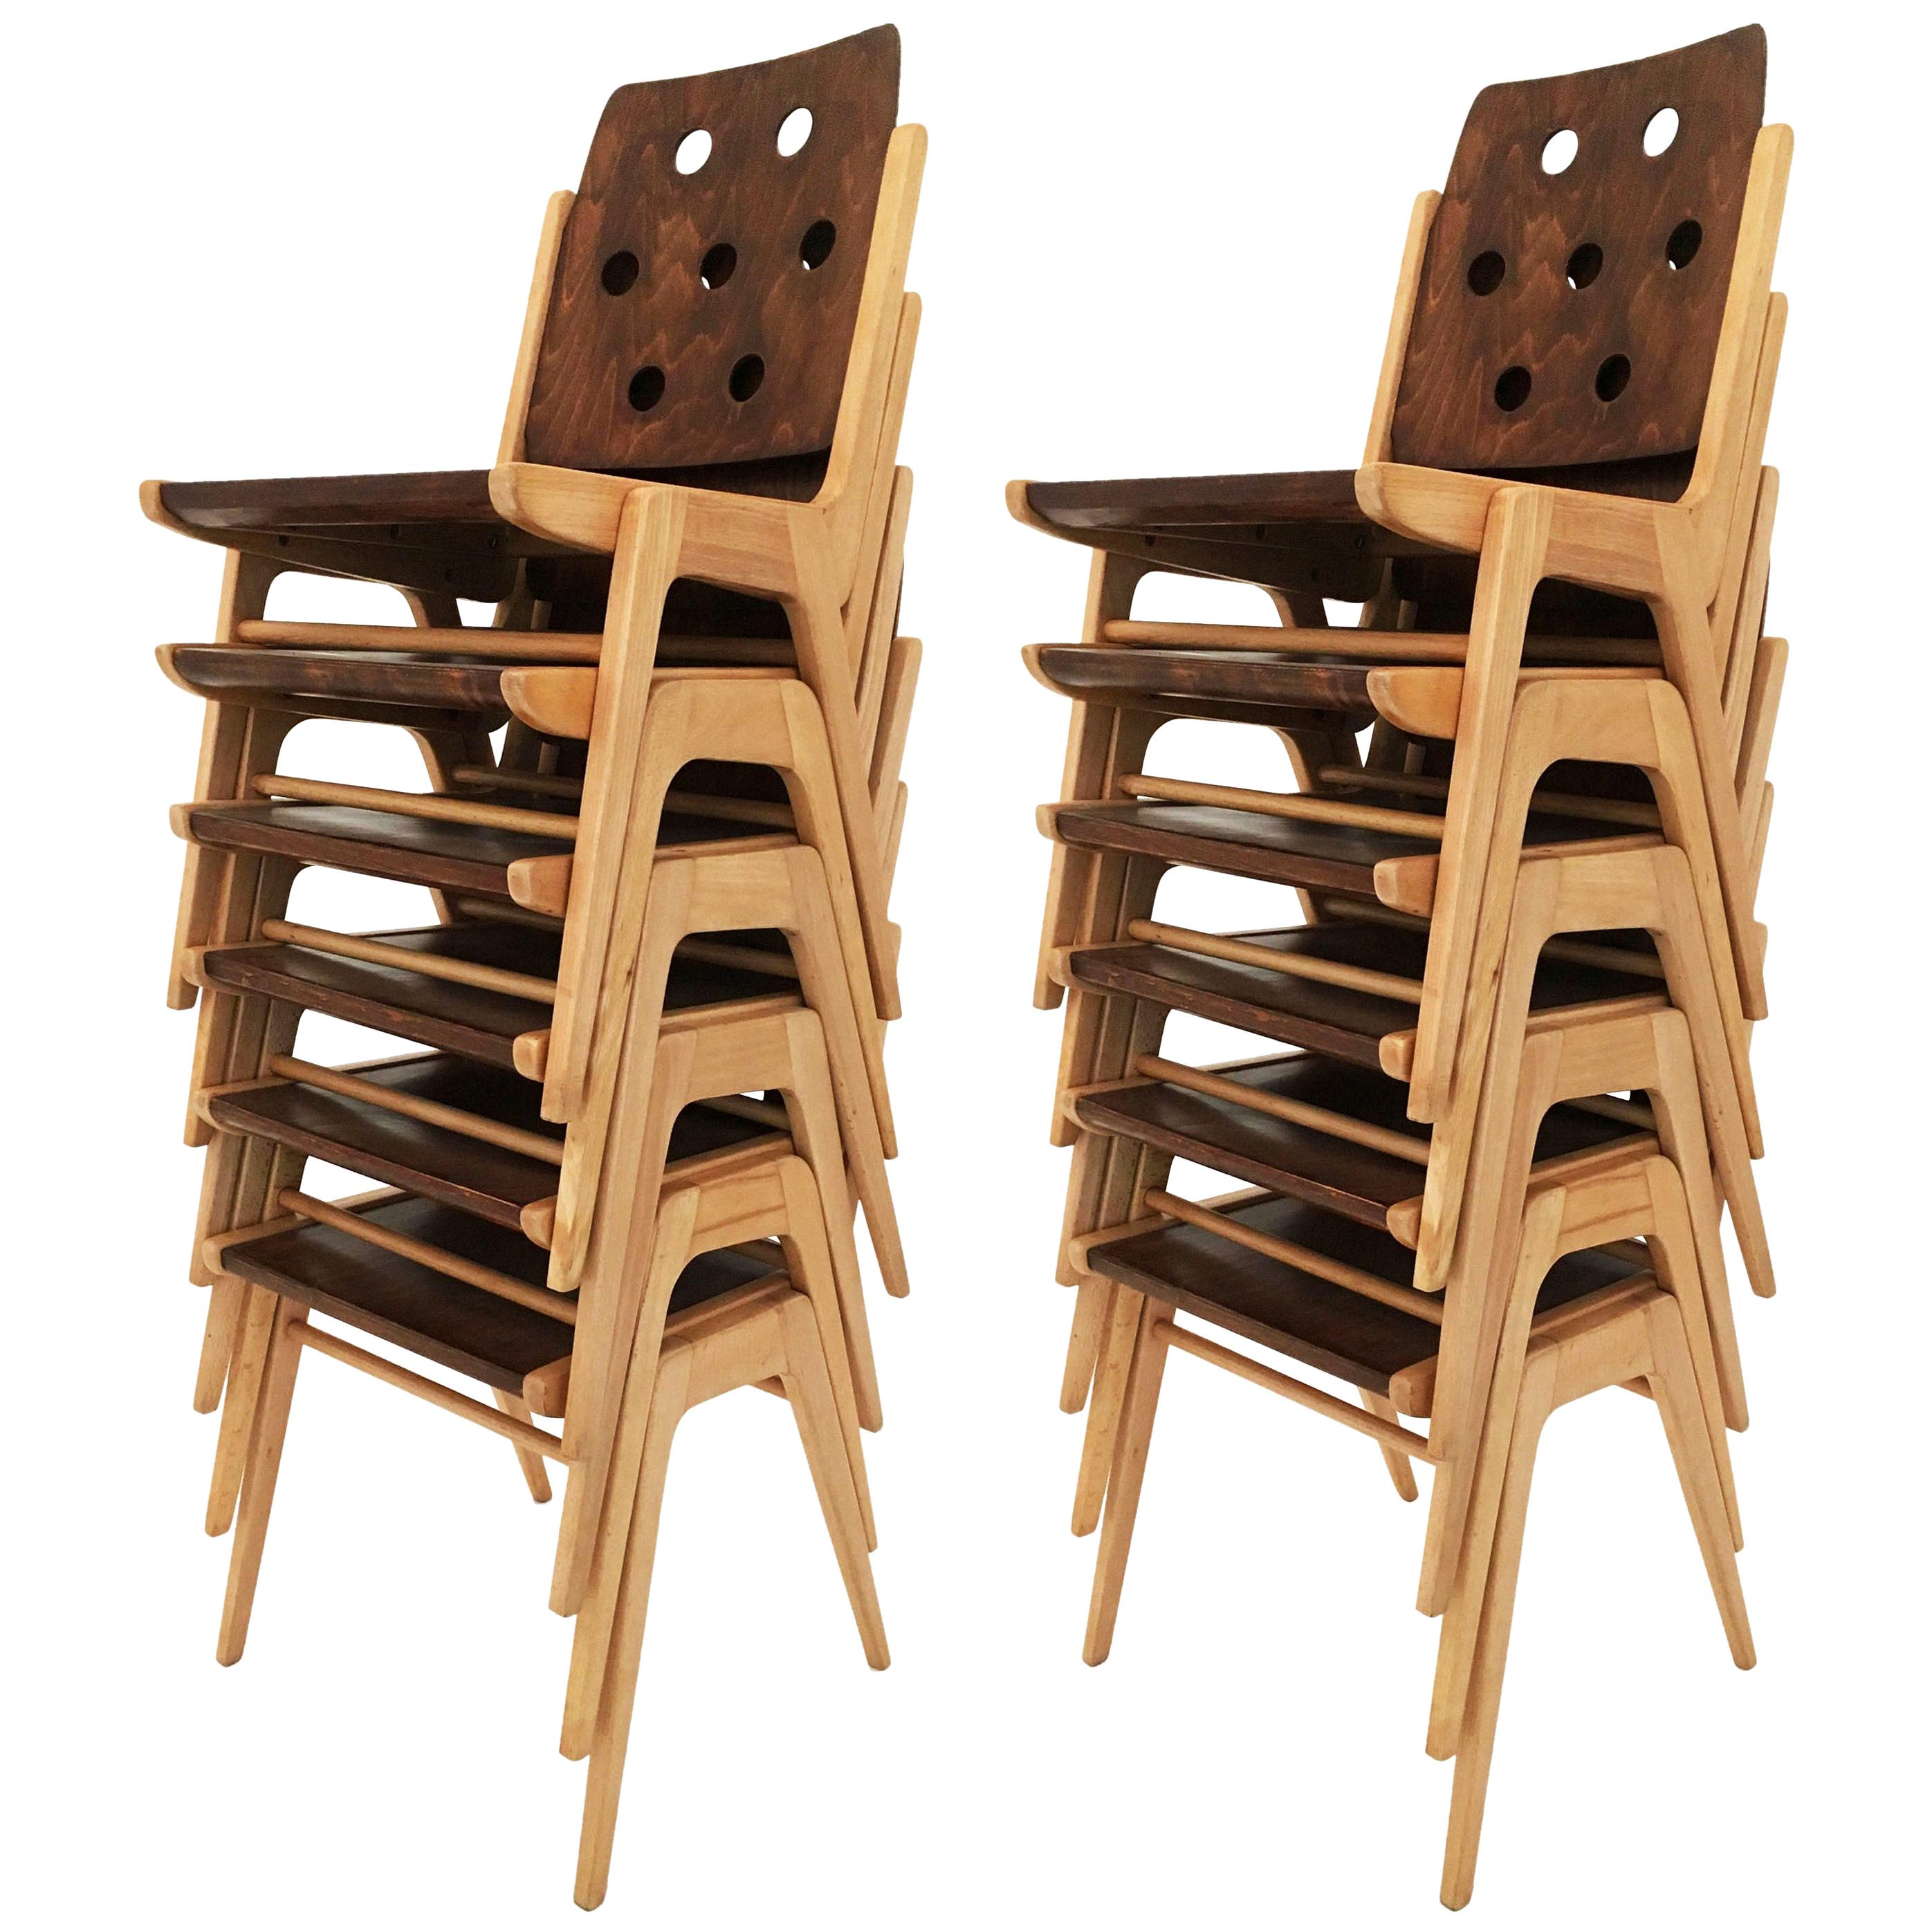 Up to 15 Franz Schuster 'Maestro' Stacking Dining Chairs, Austria, 1950s